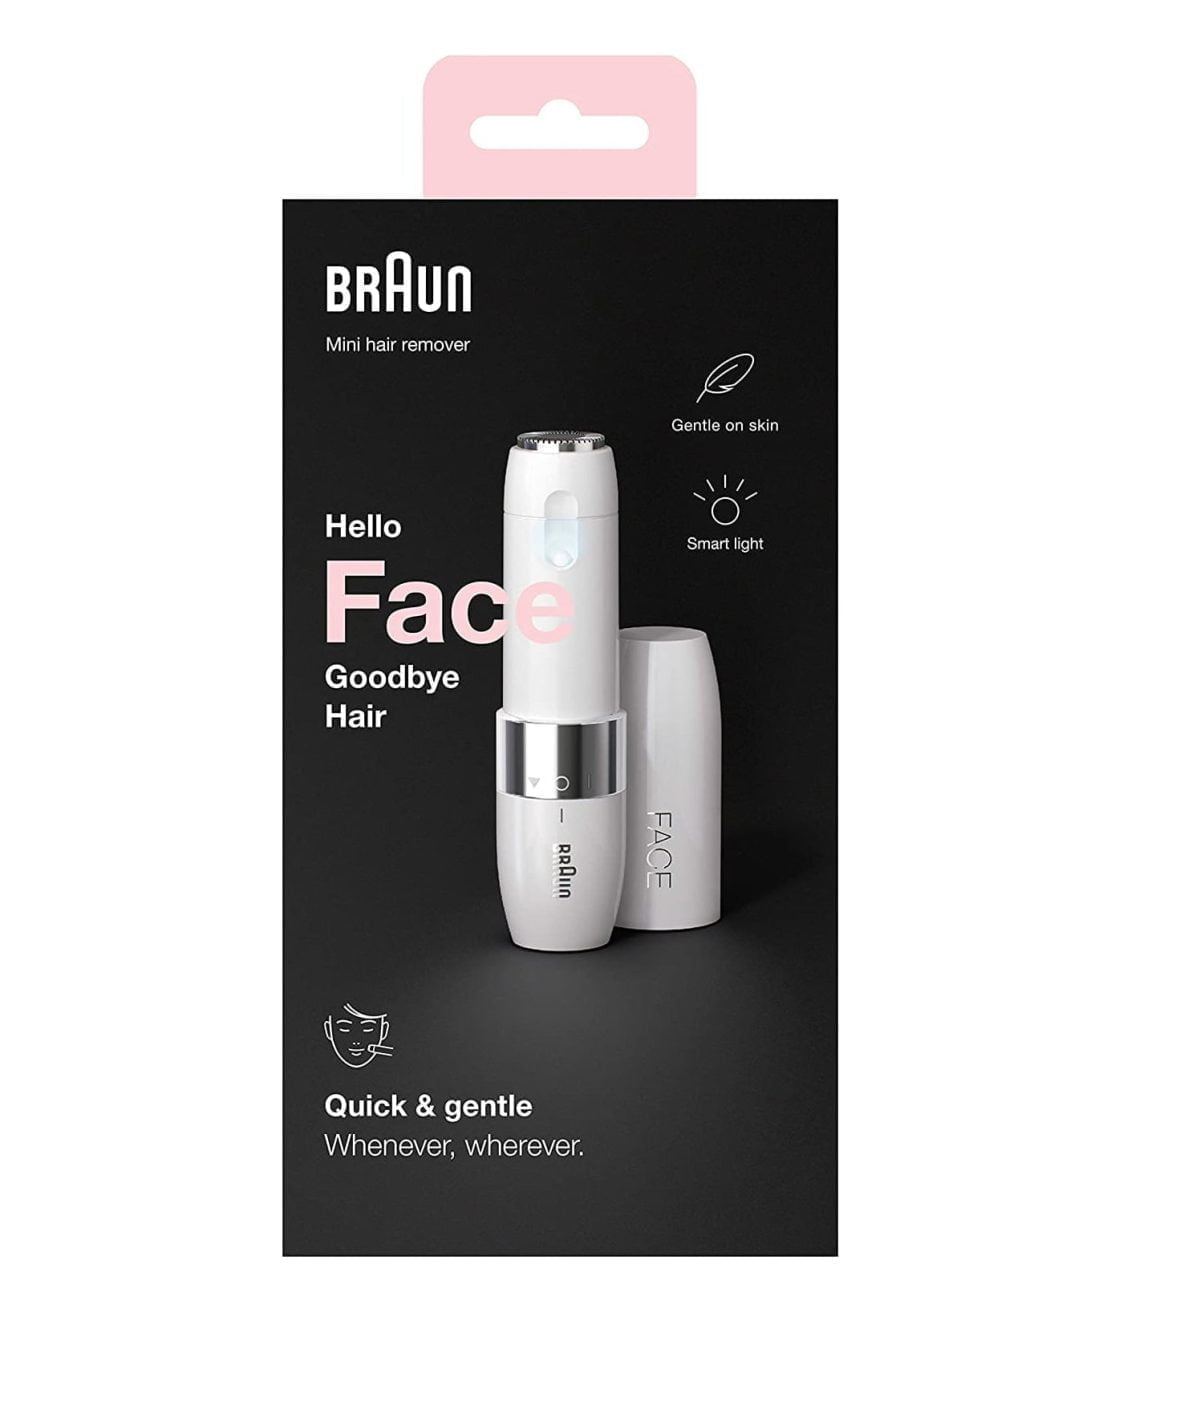 Braun &Lt;H1&Gt;Braun Face Mini Hair Remover Fs1000, Electric Facial Hair Removal For Women, White&Lt;/H1&Gt; Https://Www.youtube.com/Watch?V=Muwjqxidwc8 &Lt;Ul Class=&Quot;A-Unordered-List A-Vertical A-Spacing-Mini&Quot;&Gt; &Lt;Li&Gt;&Lt;Span Class=&Quot;A-List-Item&Quot;&Gt; Smooth Skin: Shaves Hair Cleanly And Close To The Skin, For Easier Makeup Application &Lt;/Span&Gt;&Lt;/Li&Gt; &Lt;Li&Gt;&Lt;Span Class=&Quot;A-List-Item&Quot;&Gt; Gentle &Amp; Discreet: Built For Efficient And Sensitive Facial Hair Removal For Women &Lt;/Span&Gt;&Lt;/Li&Gt; &Lt;Li&Gt;&Lt;Span Class=&Quot;A-List-Item&Quot;&Gt; Quick &Amp; Easy: Mini-Sized Design For Portability - Efficient Facial Hair Removal Anytime, Anywhere &Lt;/Span&Gt;&Lt;/Li&Gt; &Lt;Li&Gt;&Lt;Span Class=&Quot;A-List-Item&Quot;&Gt; Precise: Spot And Isolate Hairs With The Facial Hair Remover'S Built-In Smart Light &Lt;/Span&Gt;&Lt;/Li&Gt; &Lt;Li&Gt;&Lt;Span Class=&Quot;A-List-Item&Quot;&Gt; Versatile: This Facial Shaver For Women Is Easily Usable On Tricky Areas Of The Face &Lt;/Span&Gt;&Lt;/Li&Gt; &Lt;/Ul&Gt; Hair Removal Braun Face Mini Hair Remover Fs1000, Electric Facial Hair Removal For Women, White